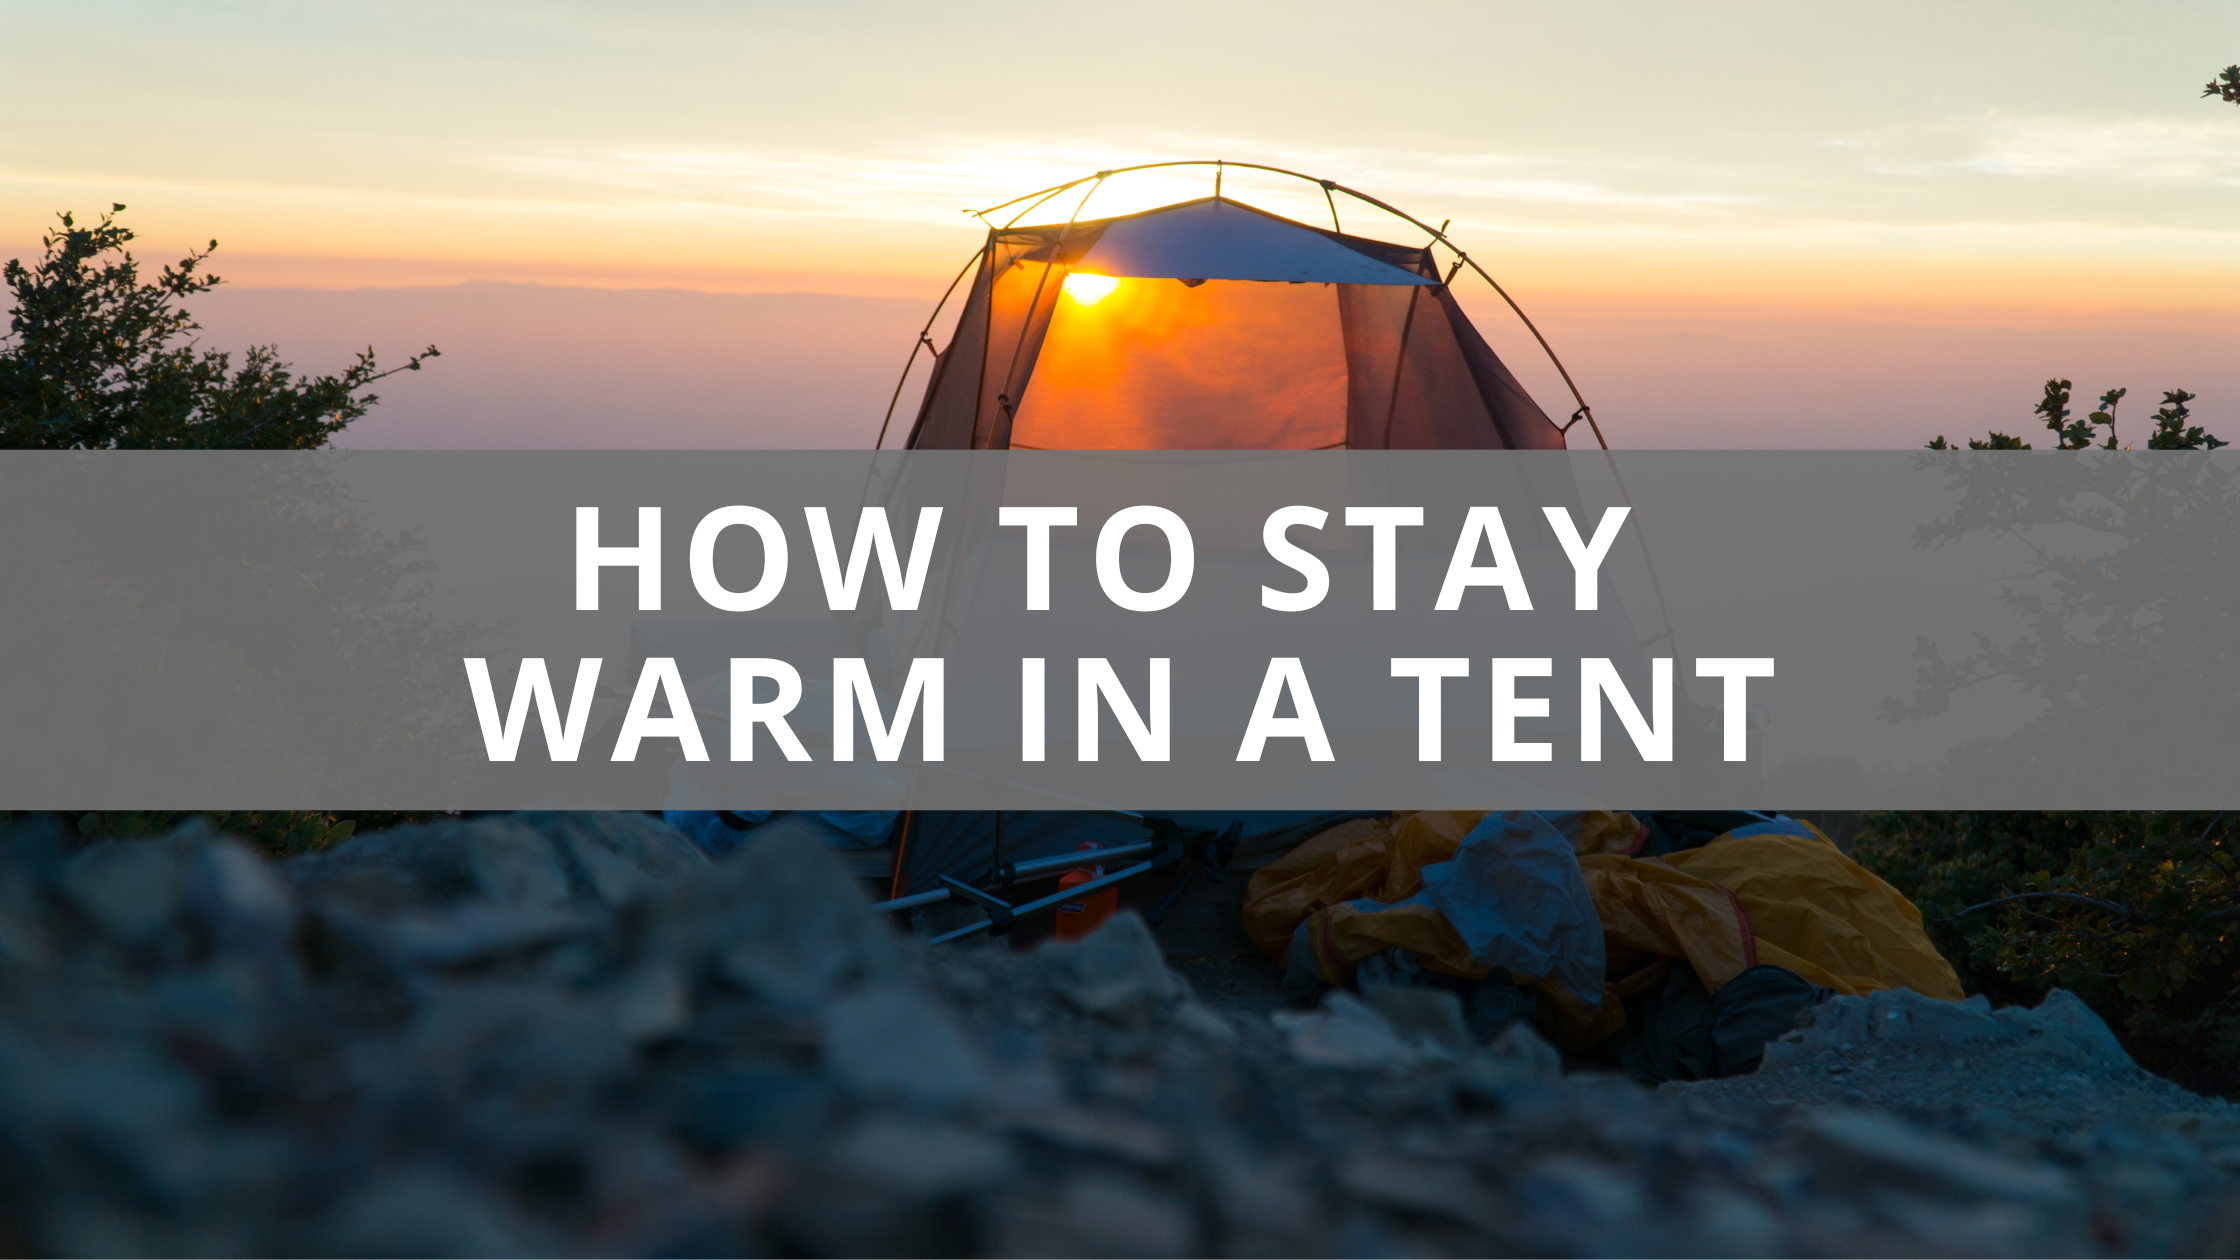 How to Stay Warm in a Tent With These Top 10 Tips